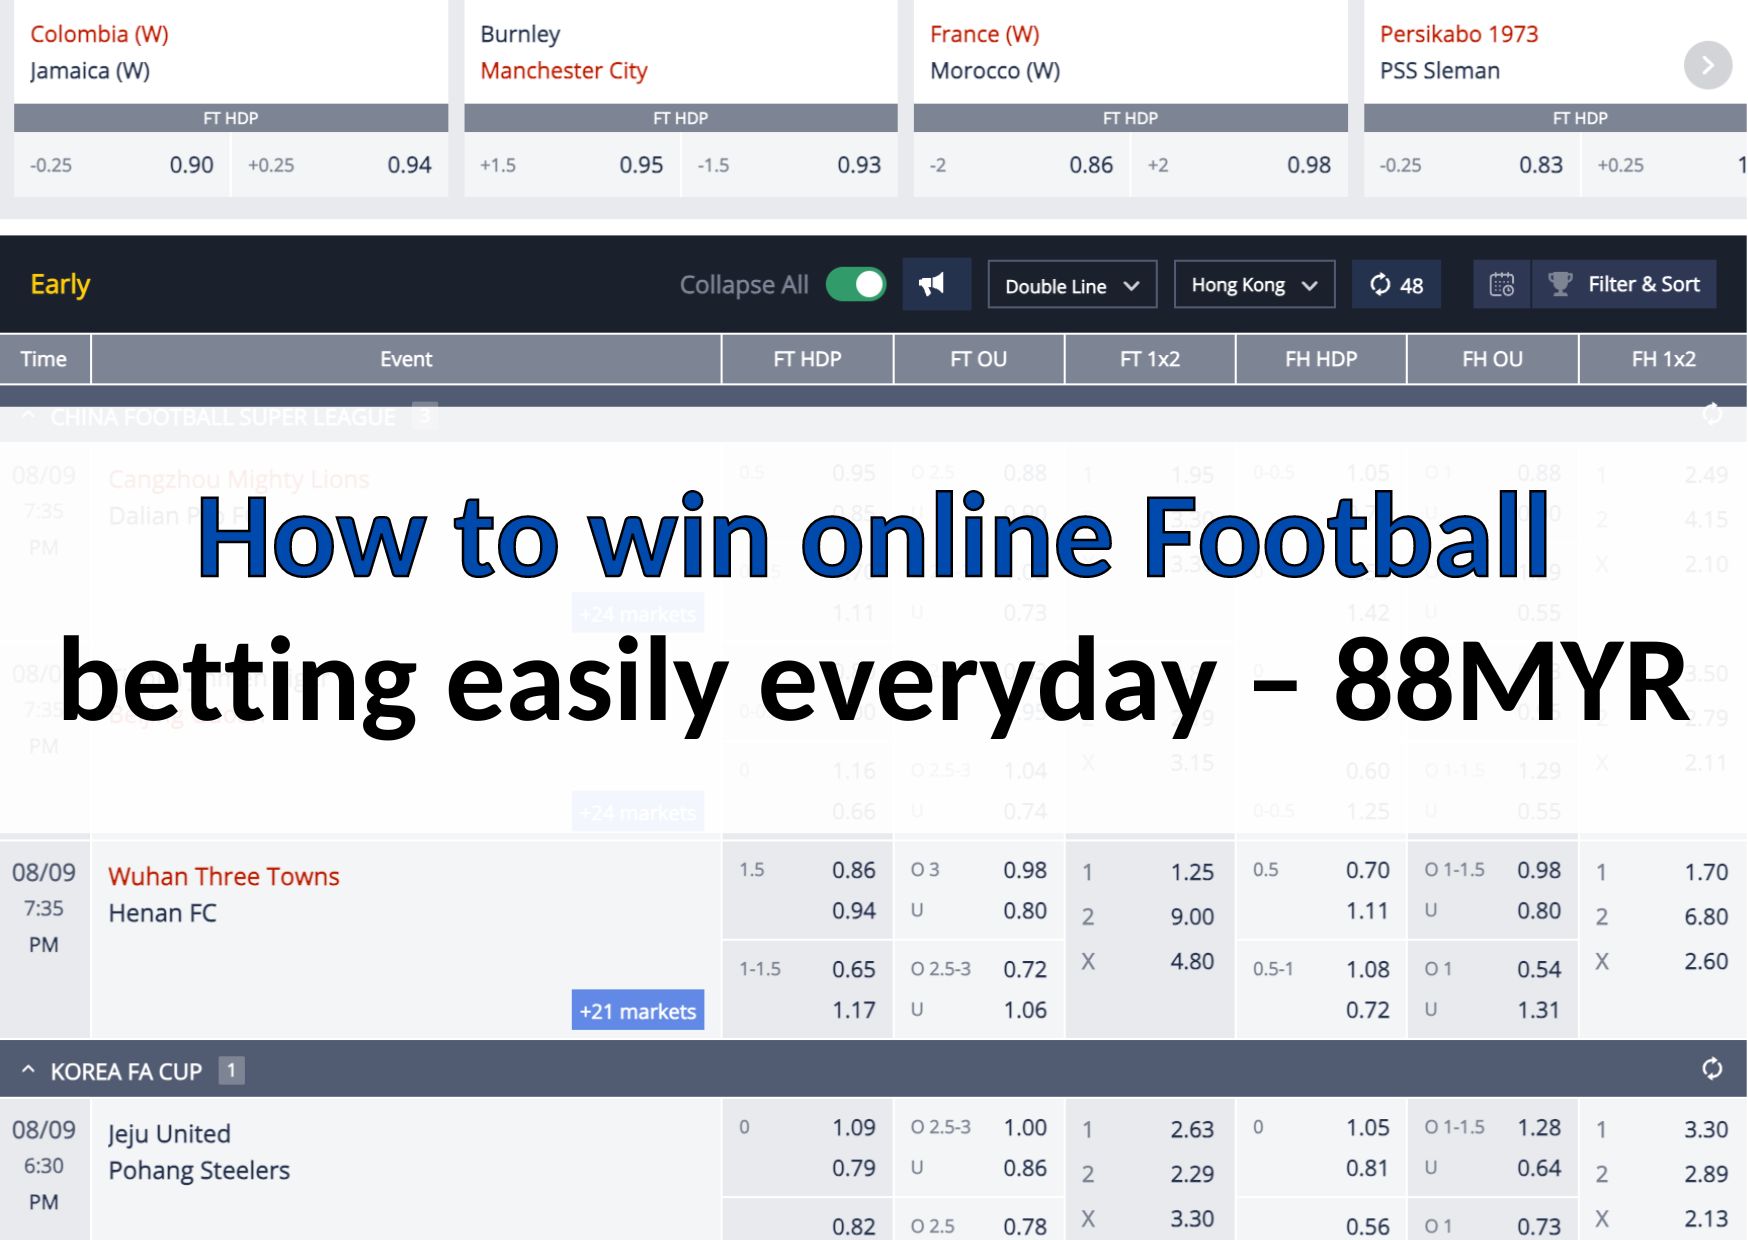 How to win online Football betting easily everyday – 88MYR